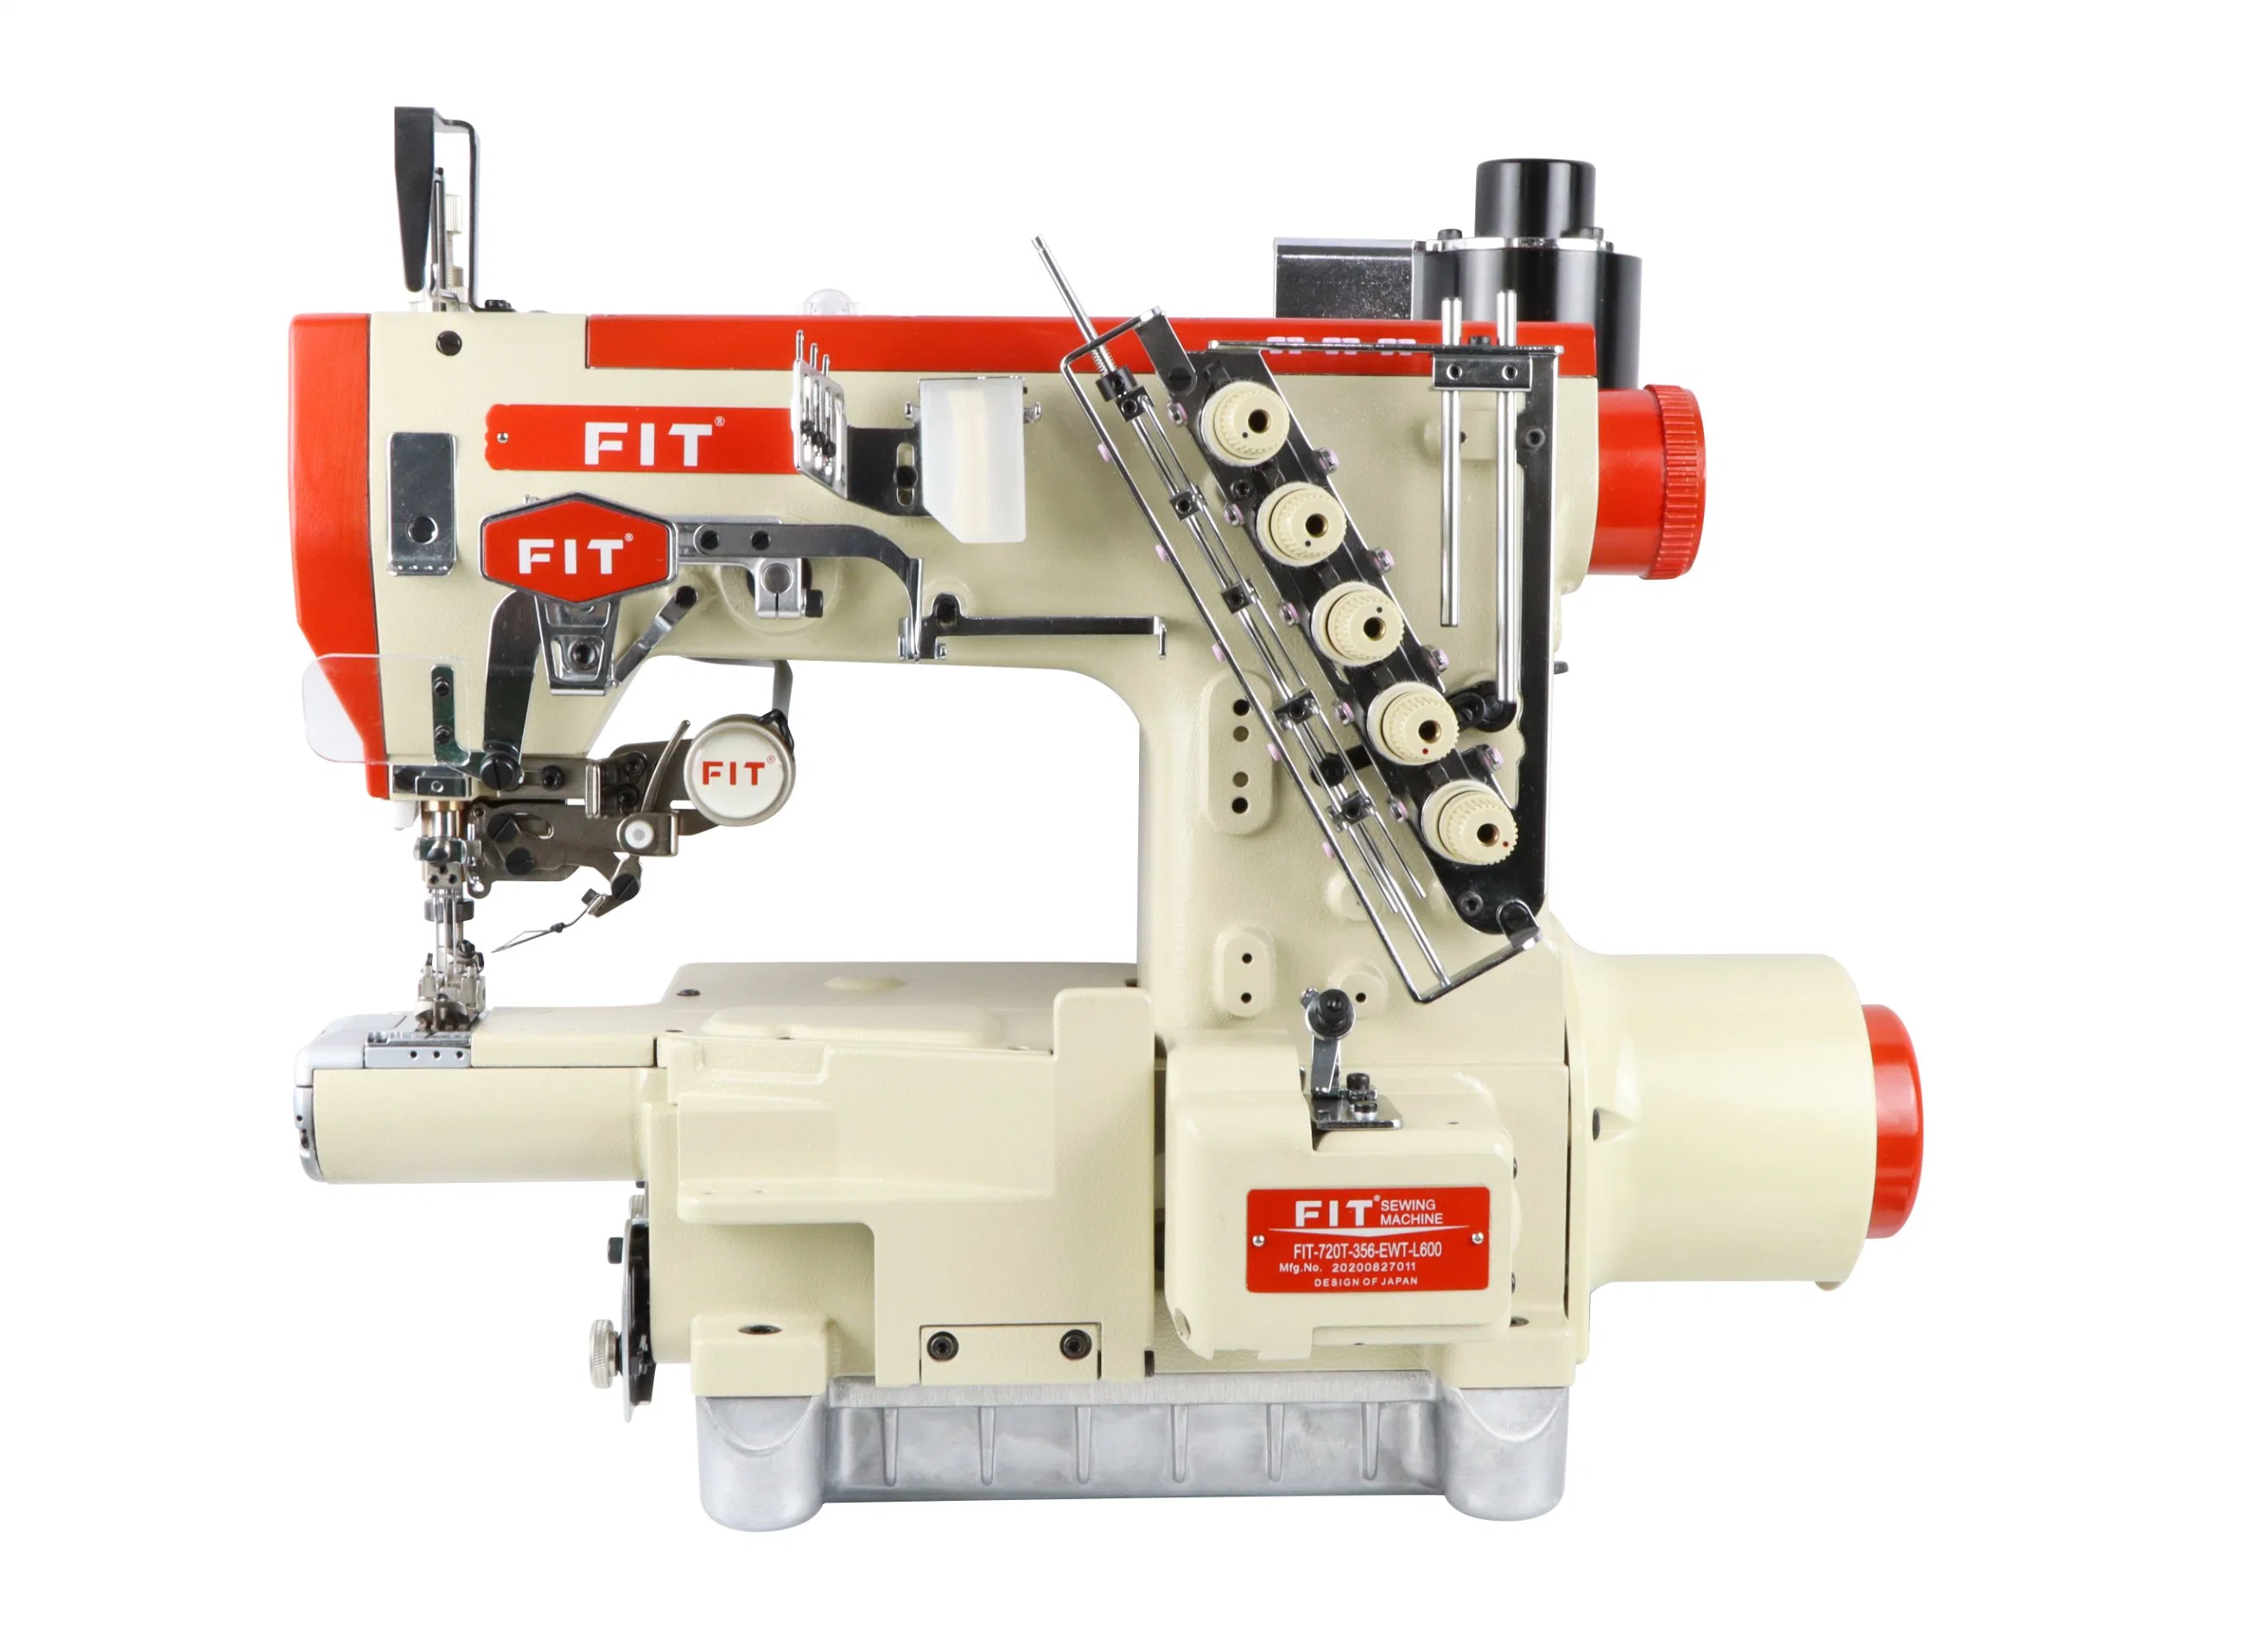 Fit-720t Direct Drive Cylinder Bed Interlock Sewing Machine with Automatic Trimmer